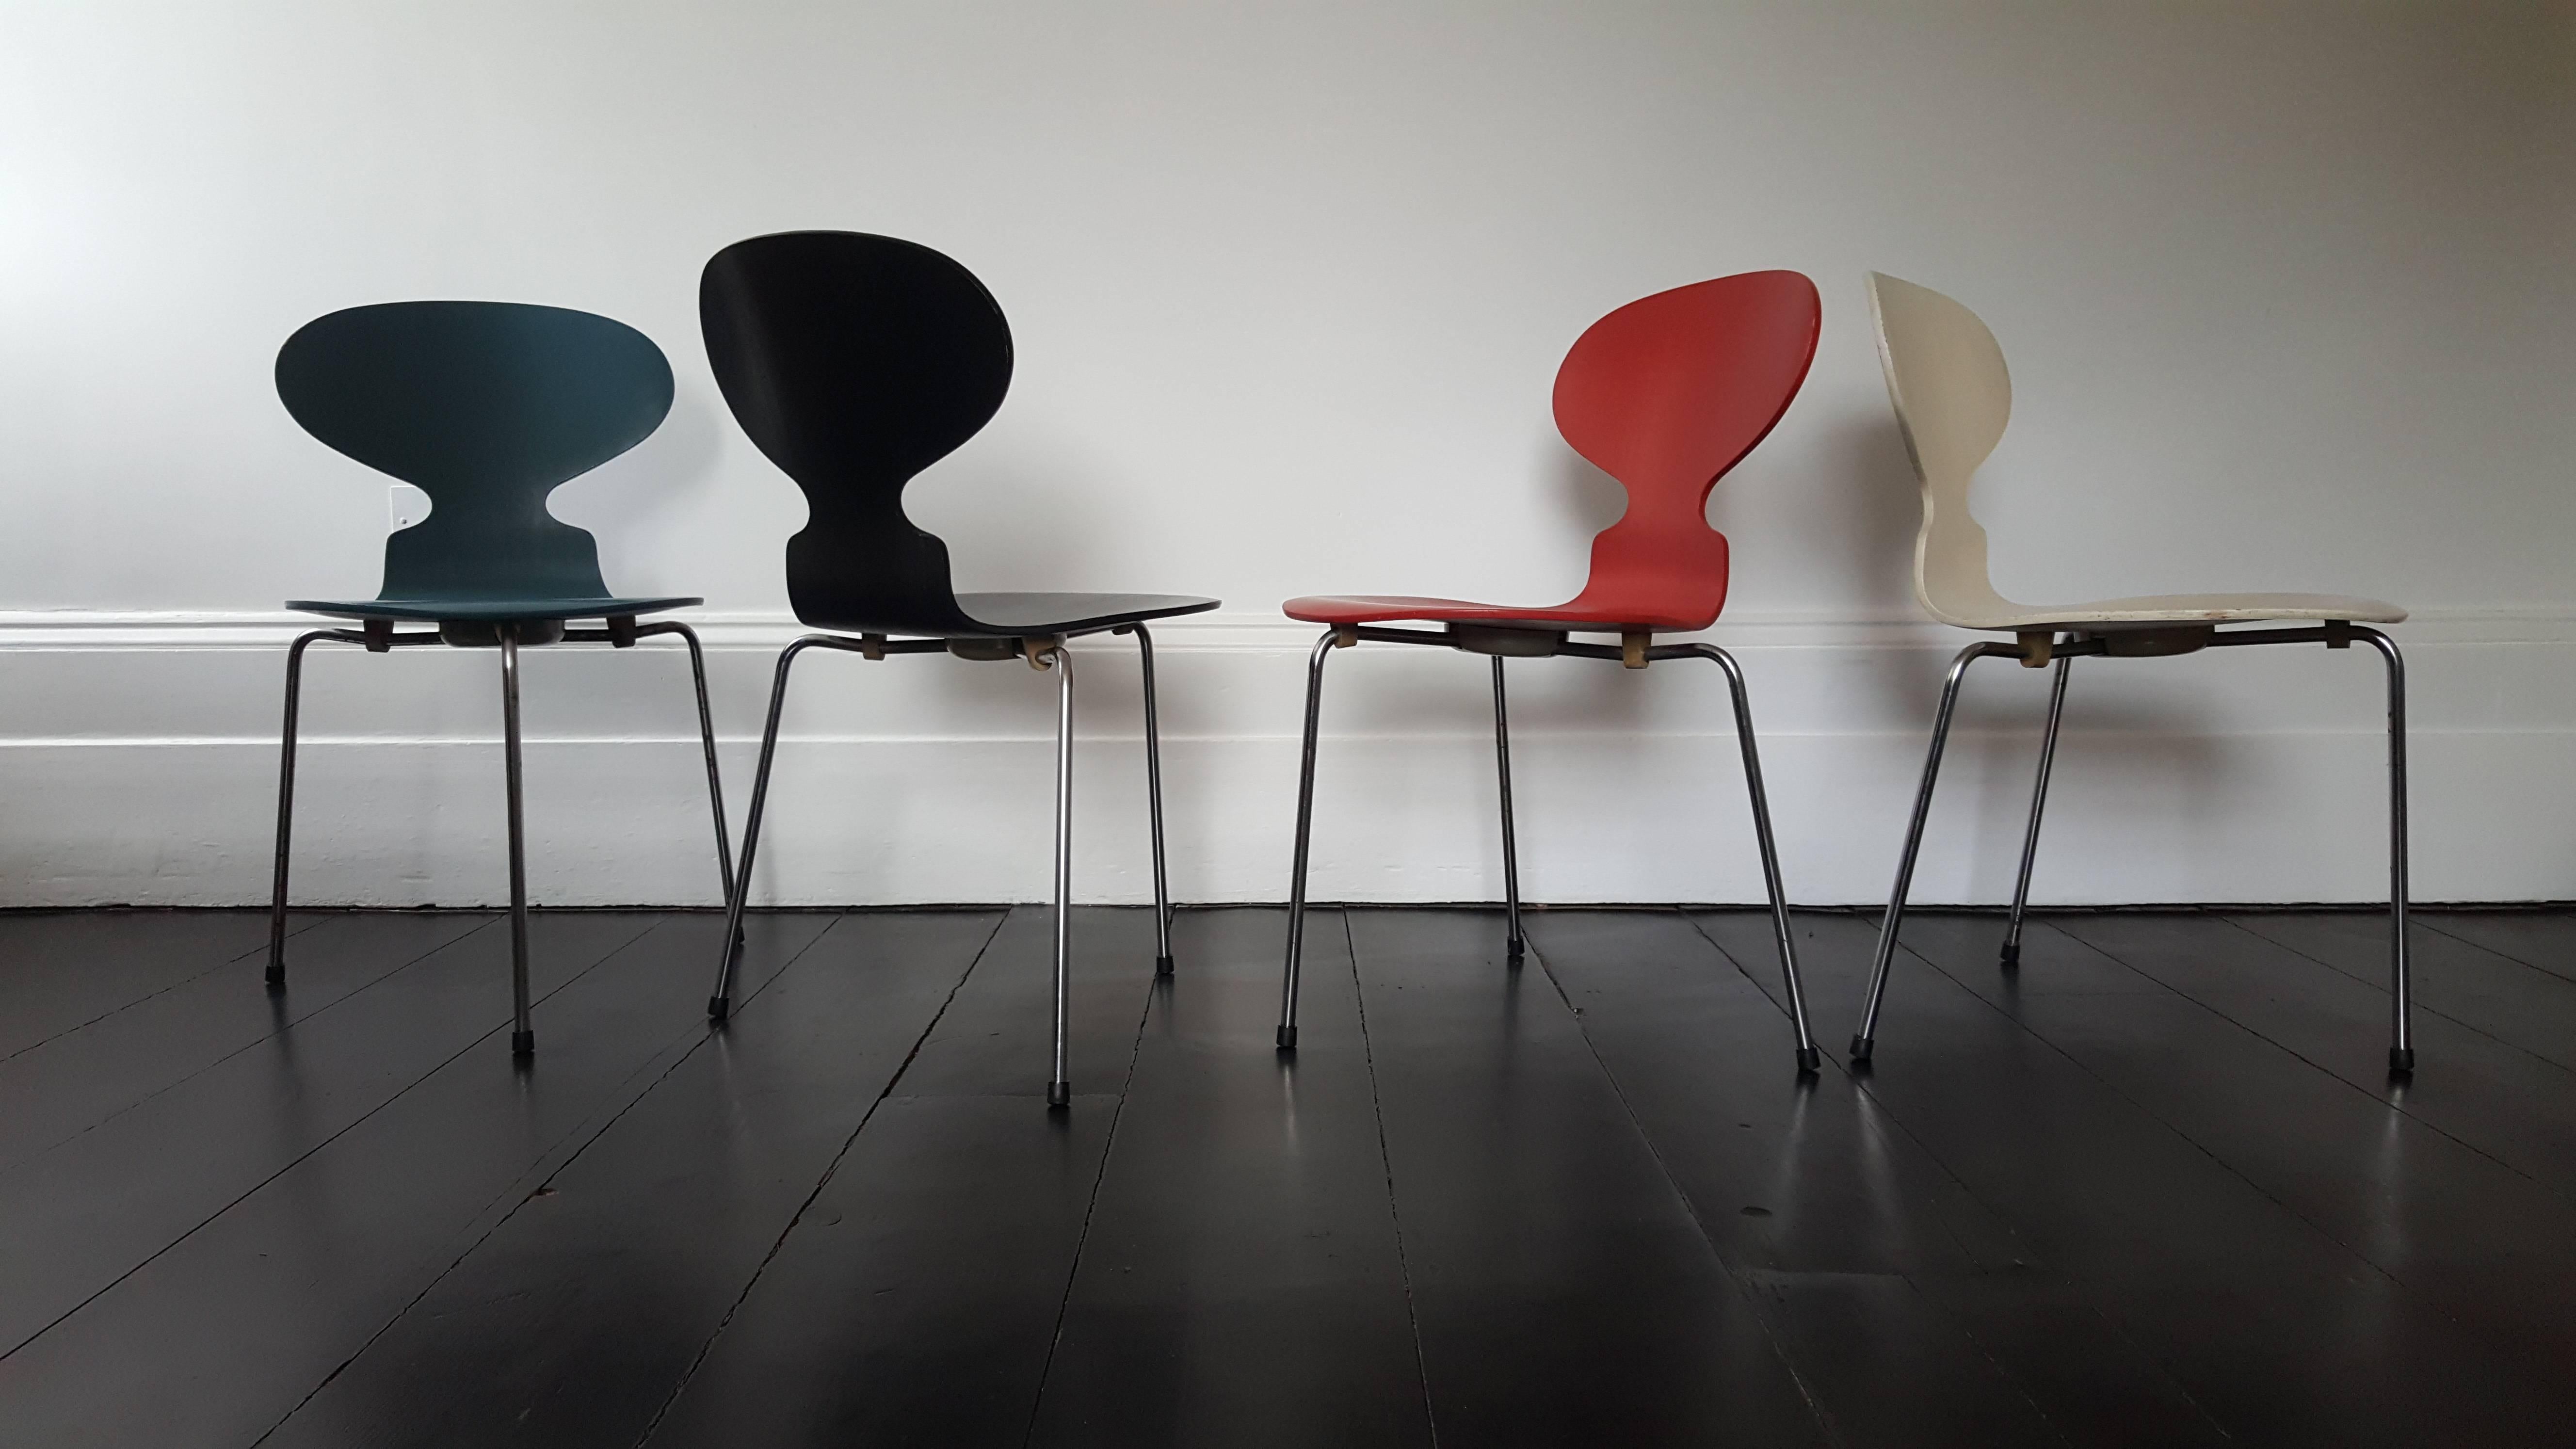 Iconic model 3100 'Ant' chair by Arne Jacobsen for Fritz Hansen.

Model 3100 'Ant' chairs were designed by Arne Jacobsen in 1952.